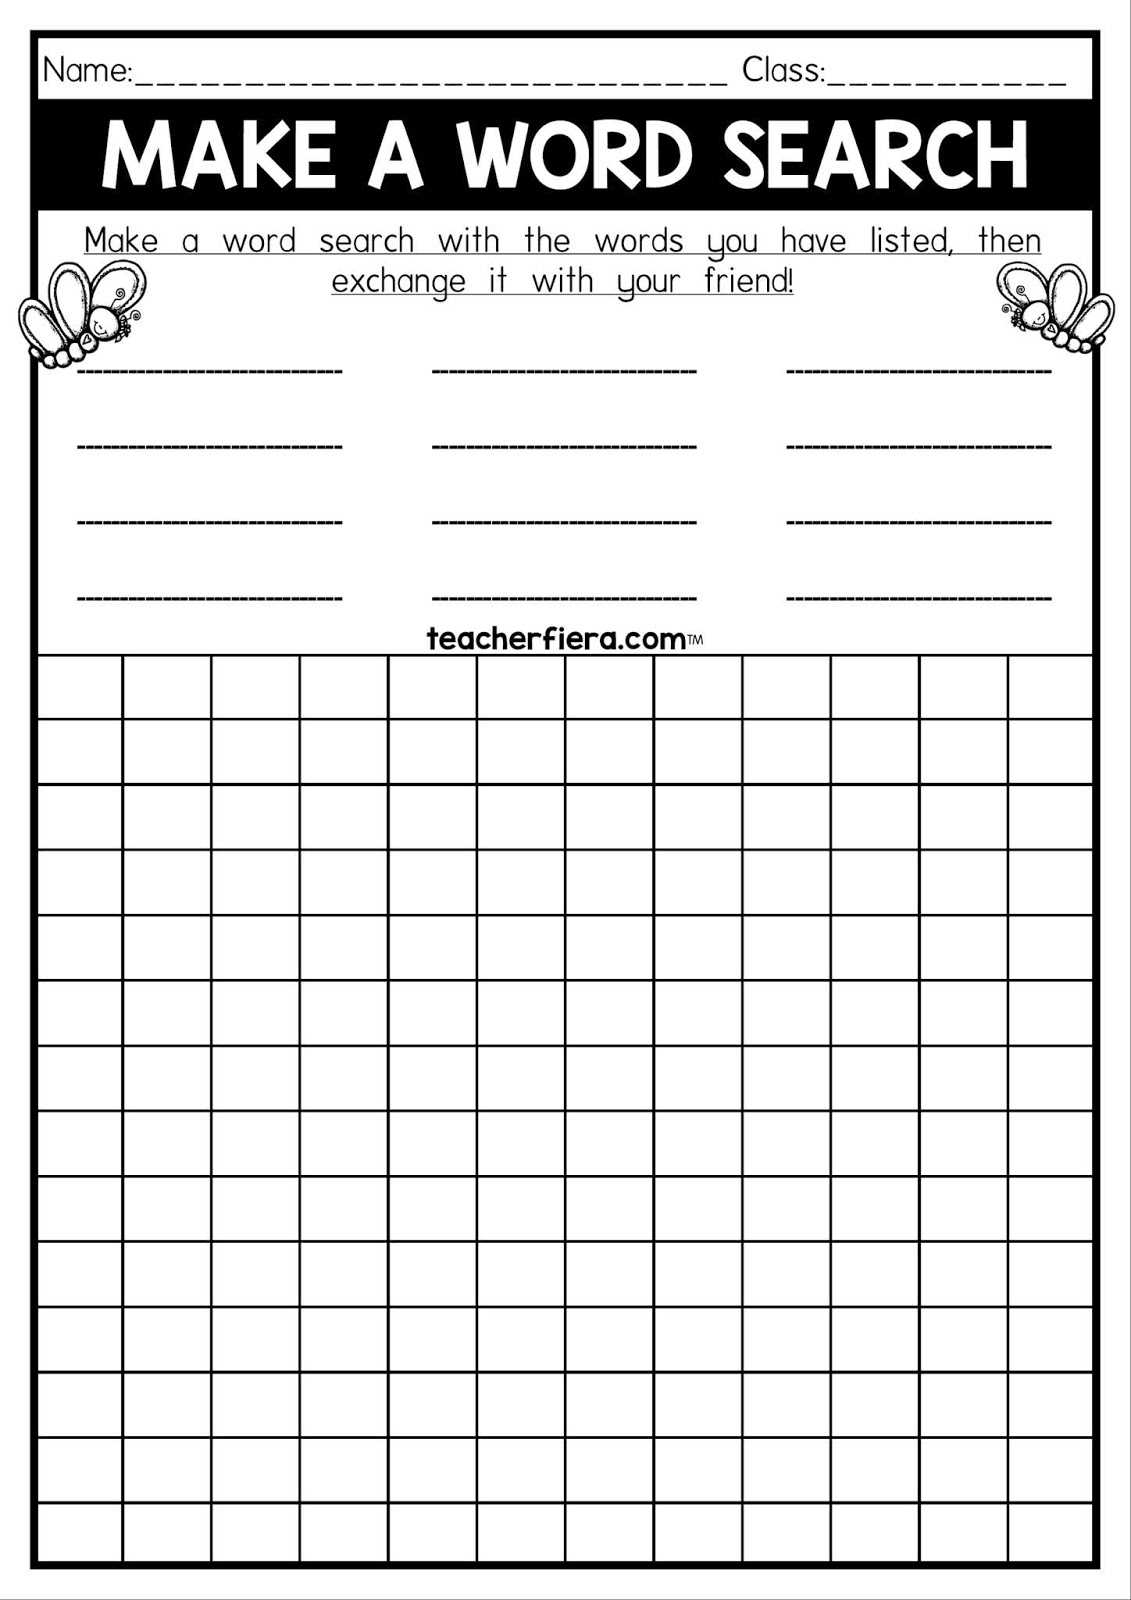 teacherfiera-make-a-word-search-for-word-sleuth-template-best